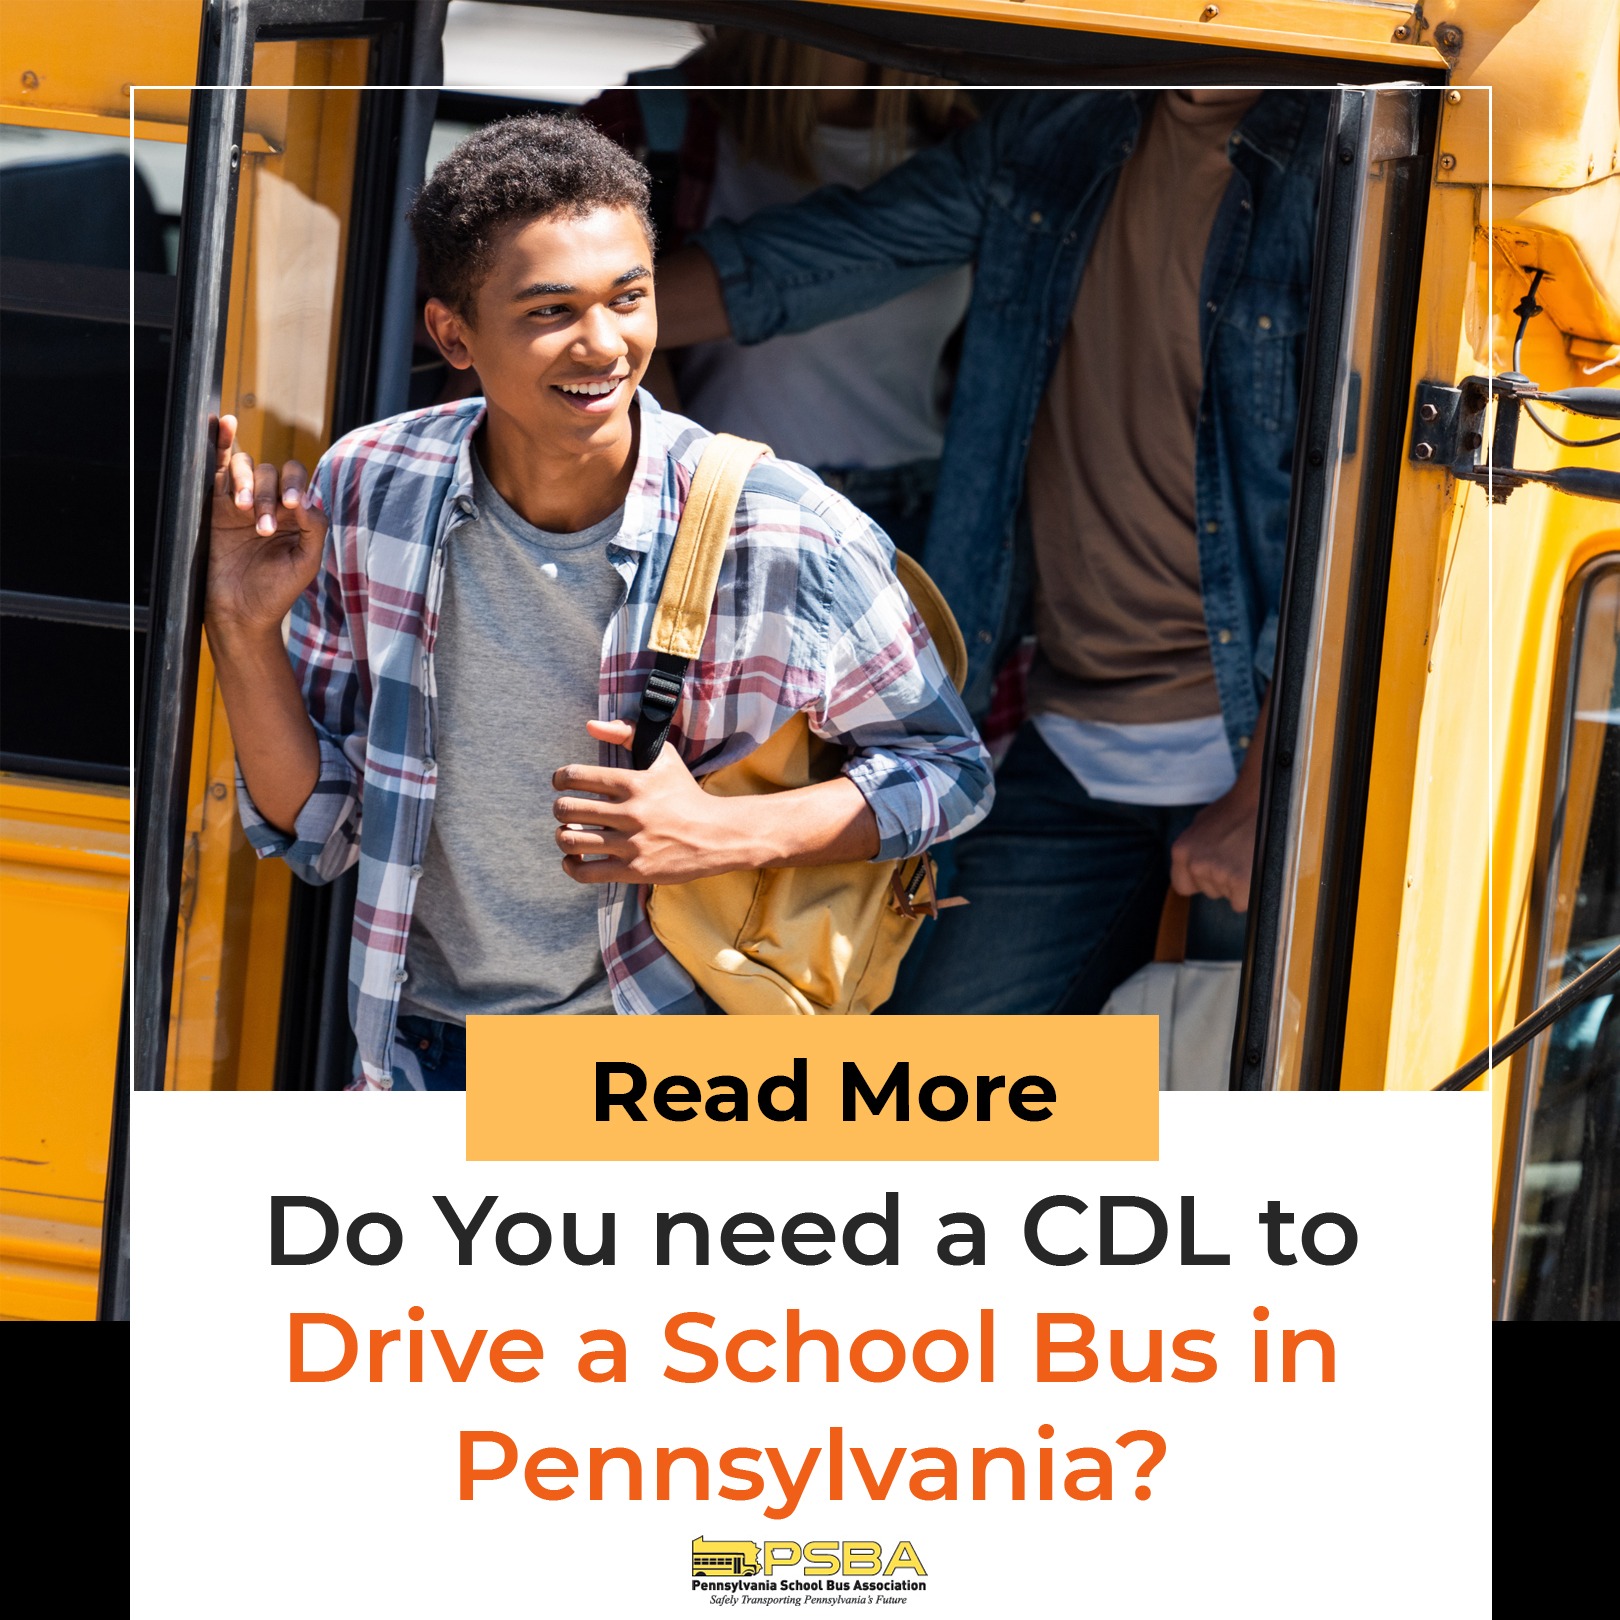 Do You Need a CDL to Drive a School Bus in Pennsylvania?